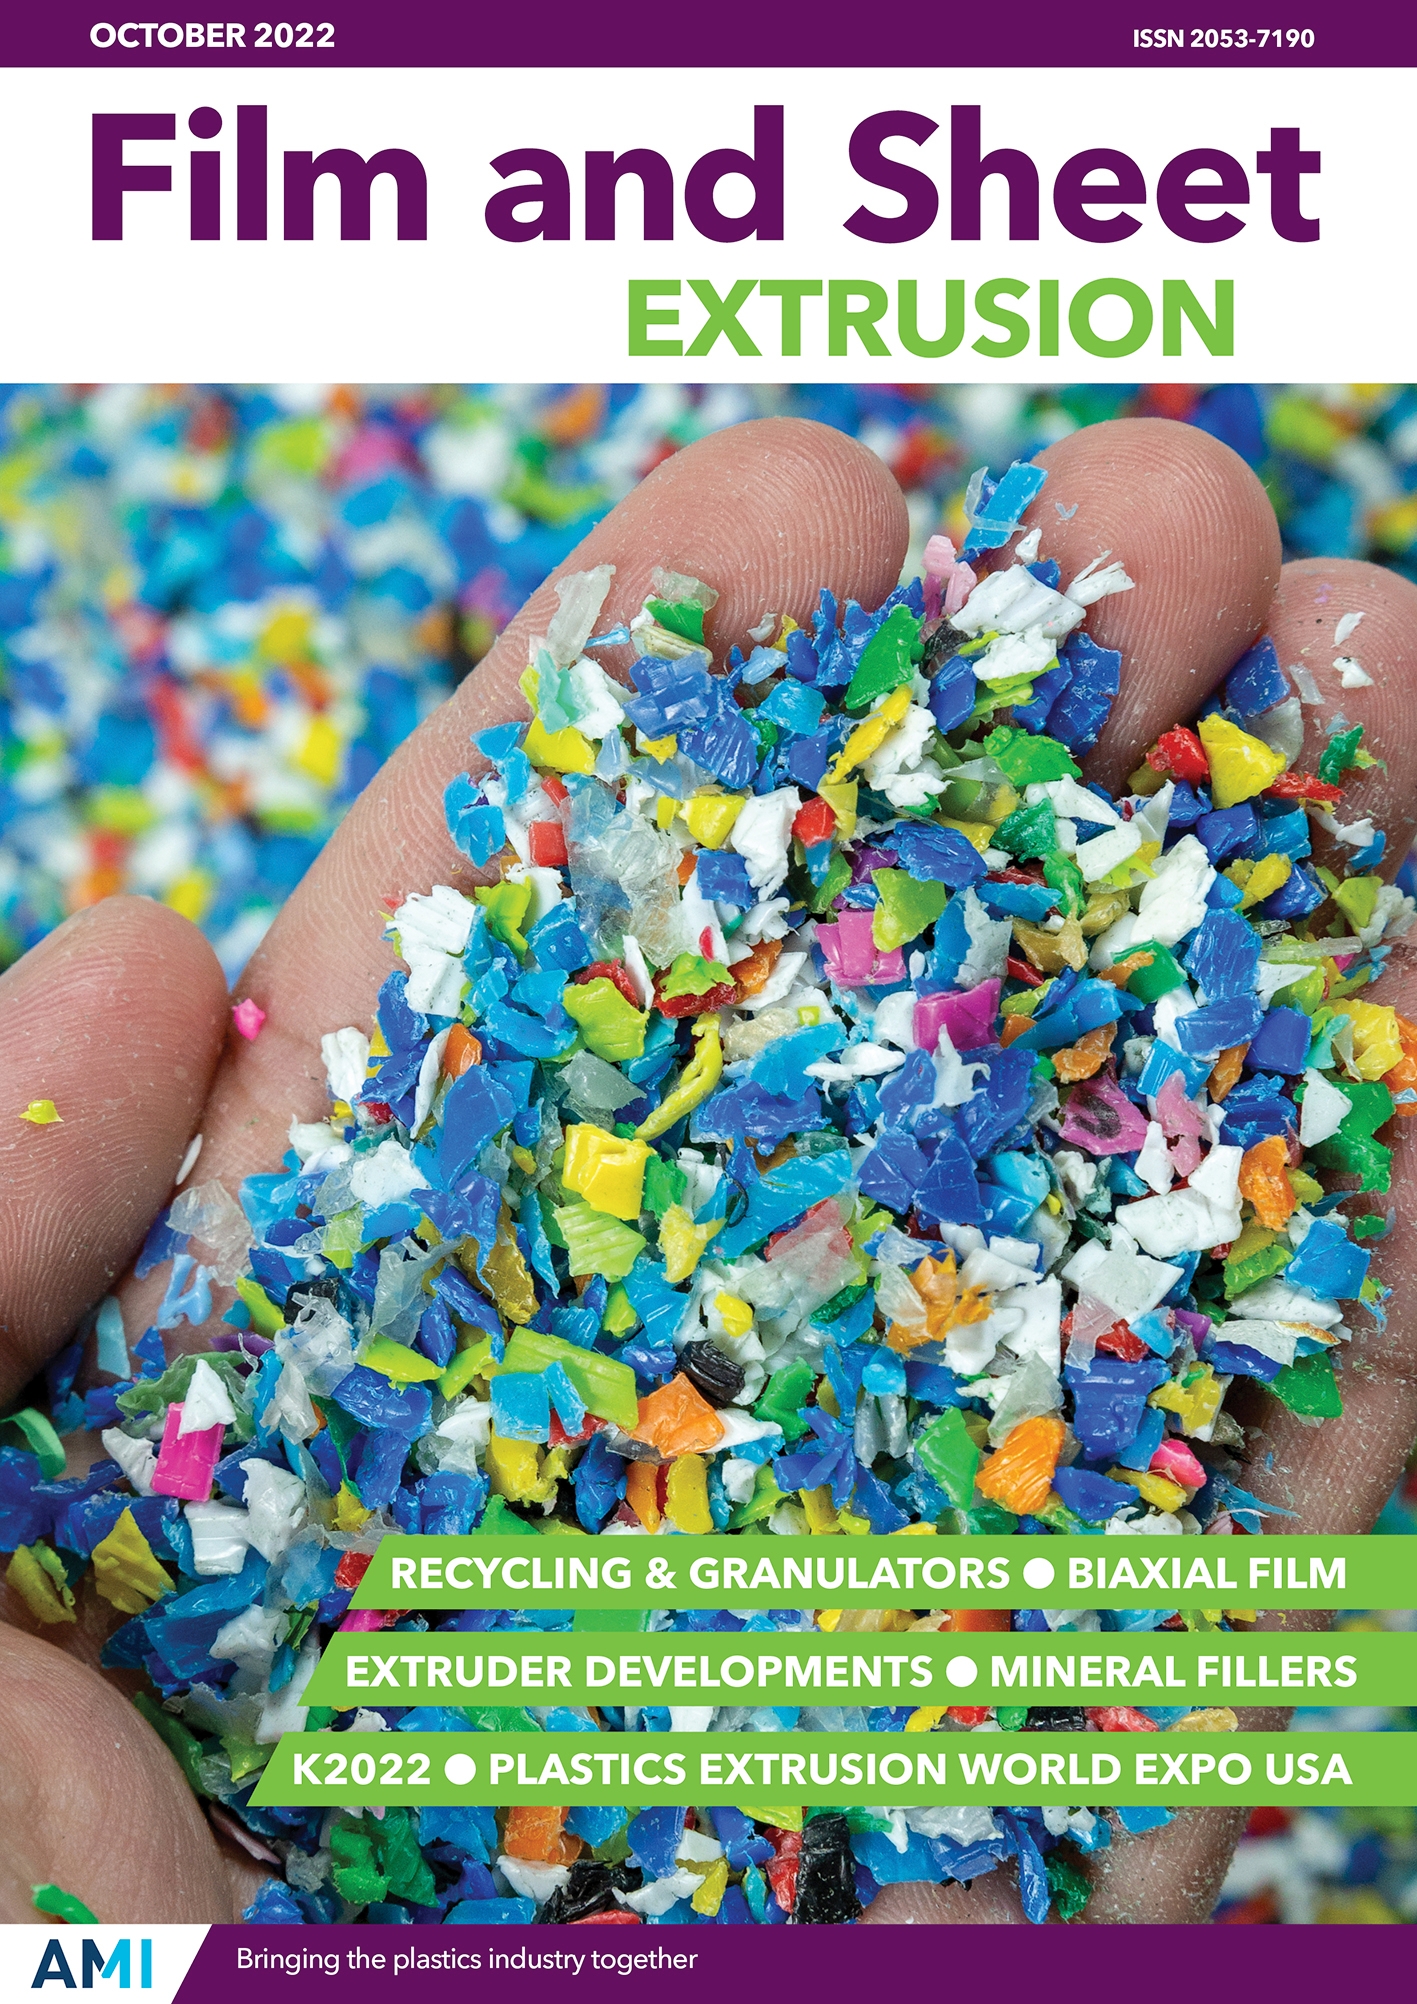 Film and Sheet Extrusion October 2022